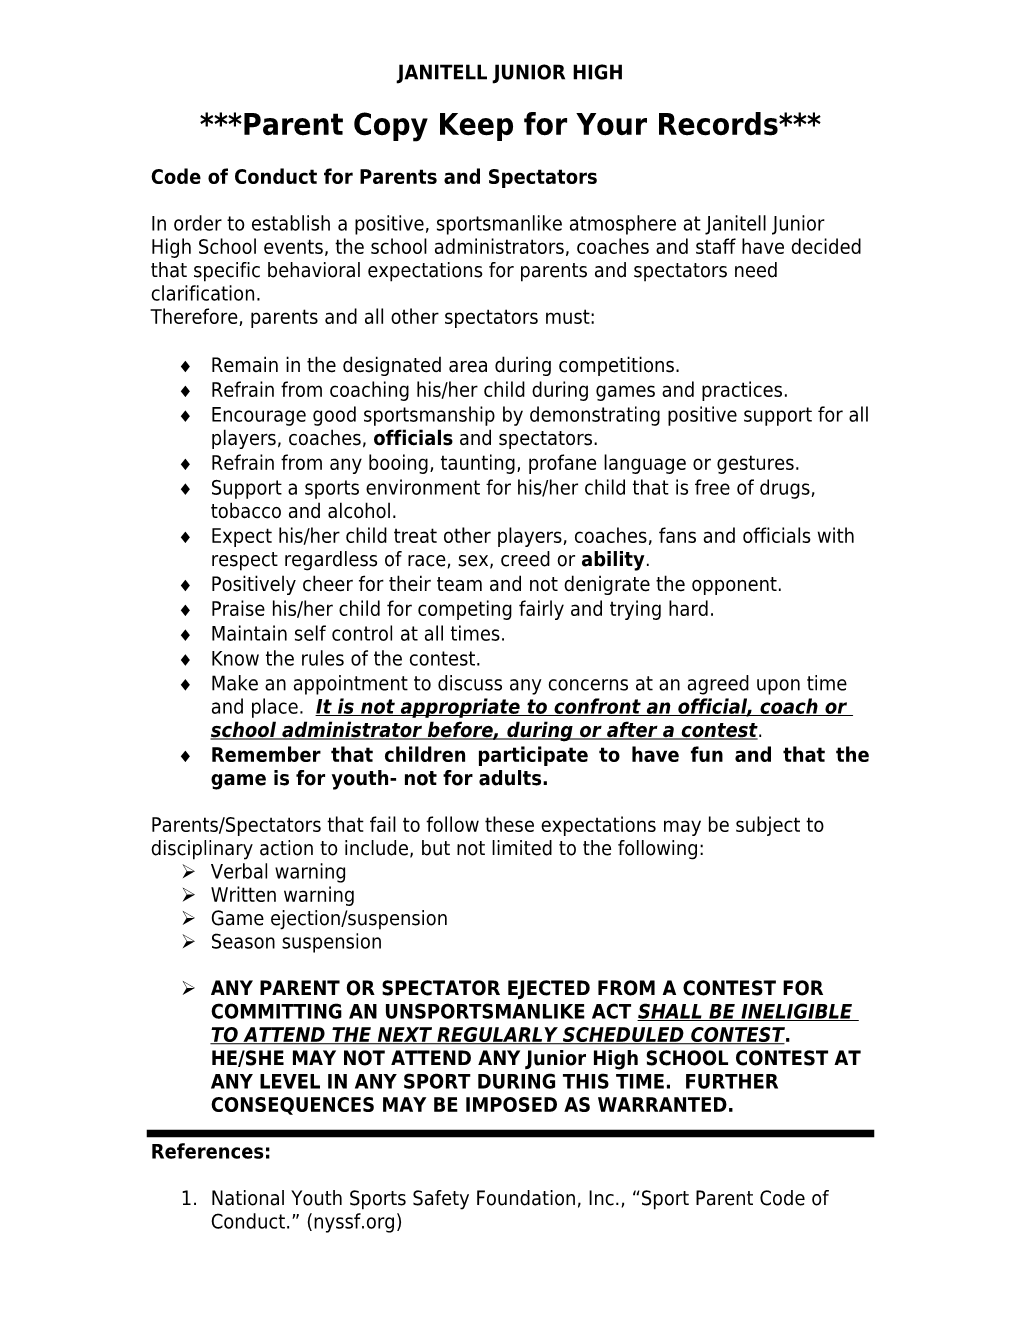 Code of Conduct for Parents and Spectators